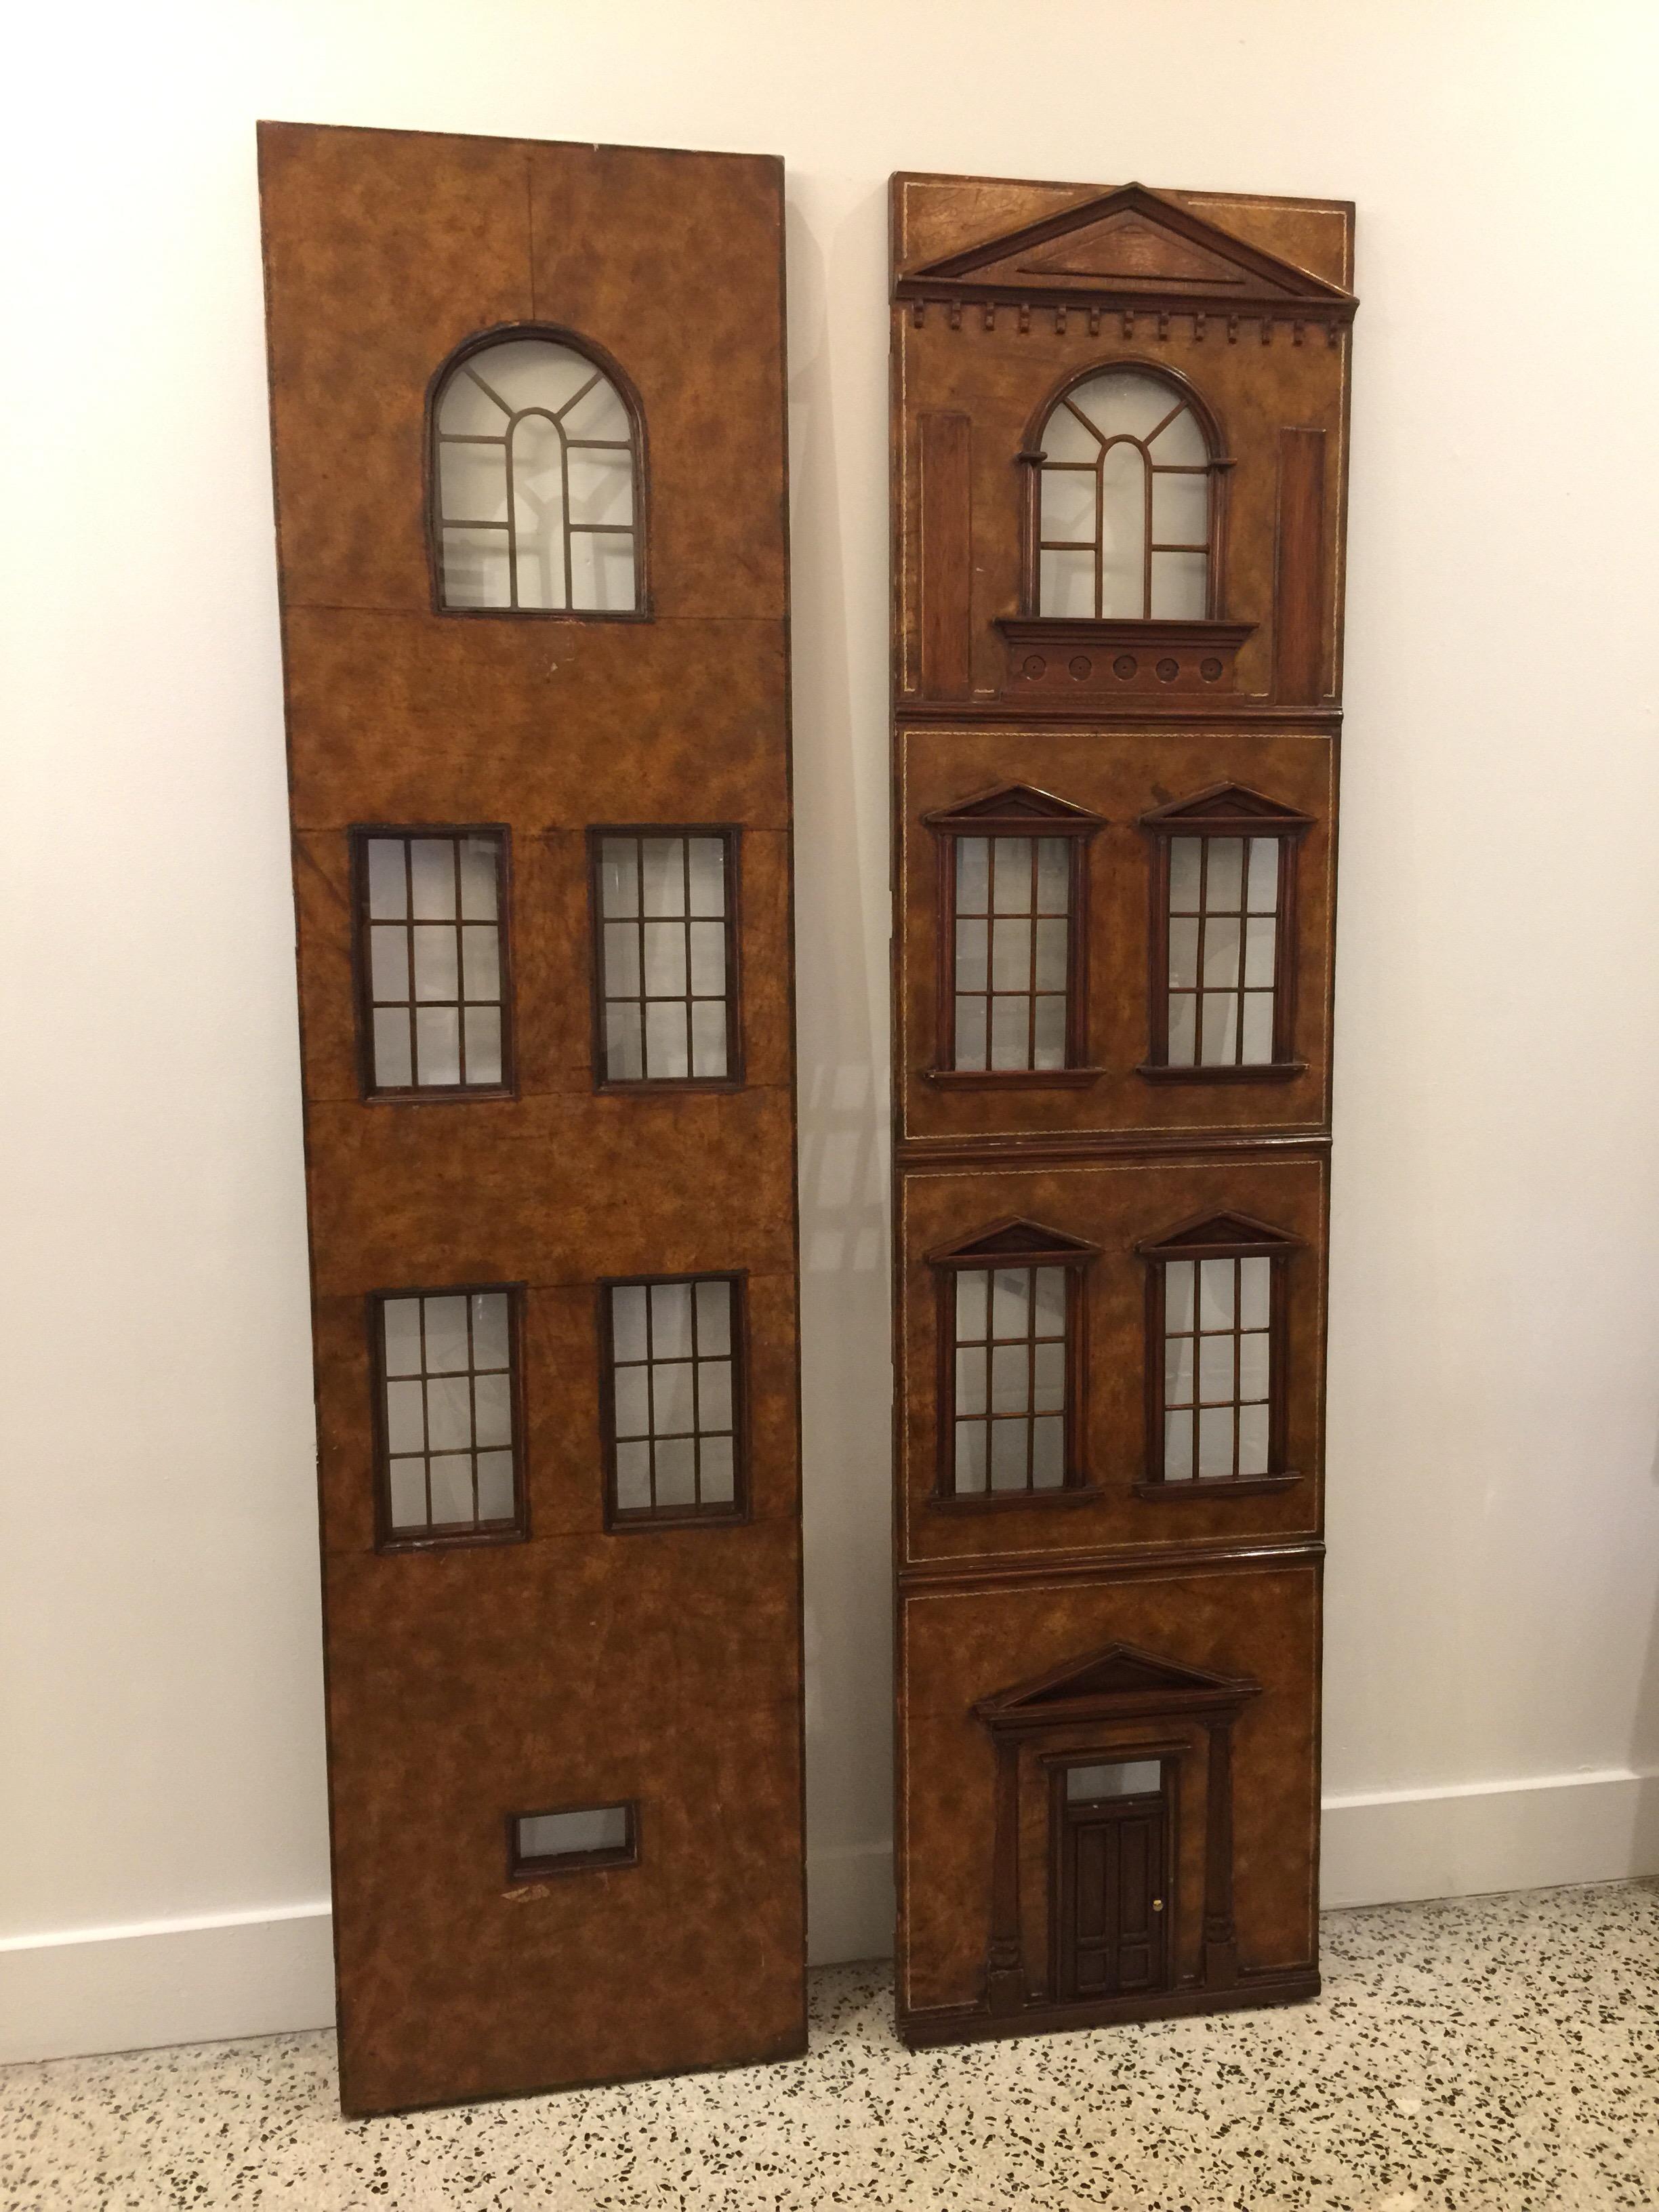 With a classic English building façade, these two door panels with finely crafted details and glass panels are perfect for wall art, etc. Clad in embossed leather on both sides (front and back). Real glass and in 3-D relief.